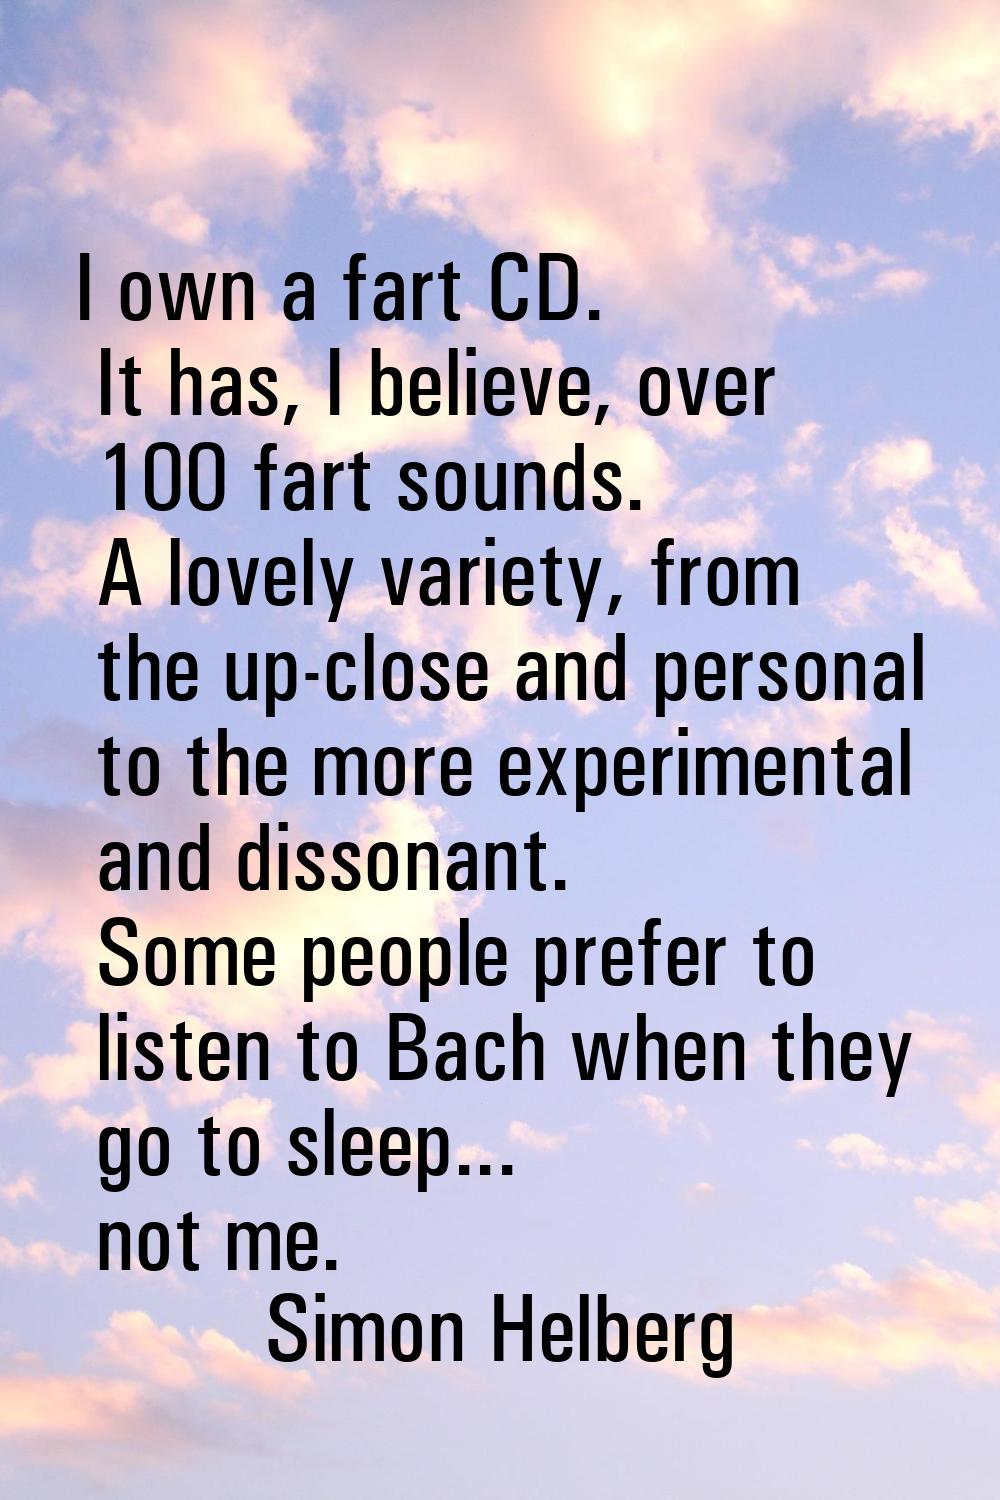 I own a fart CD. It has, I believe, over 100 fart sounds. A lovely variety, from the up-close and p